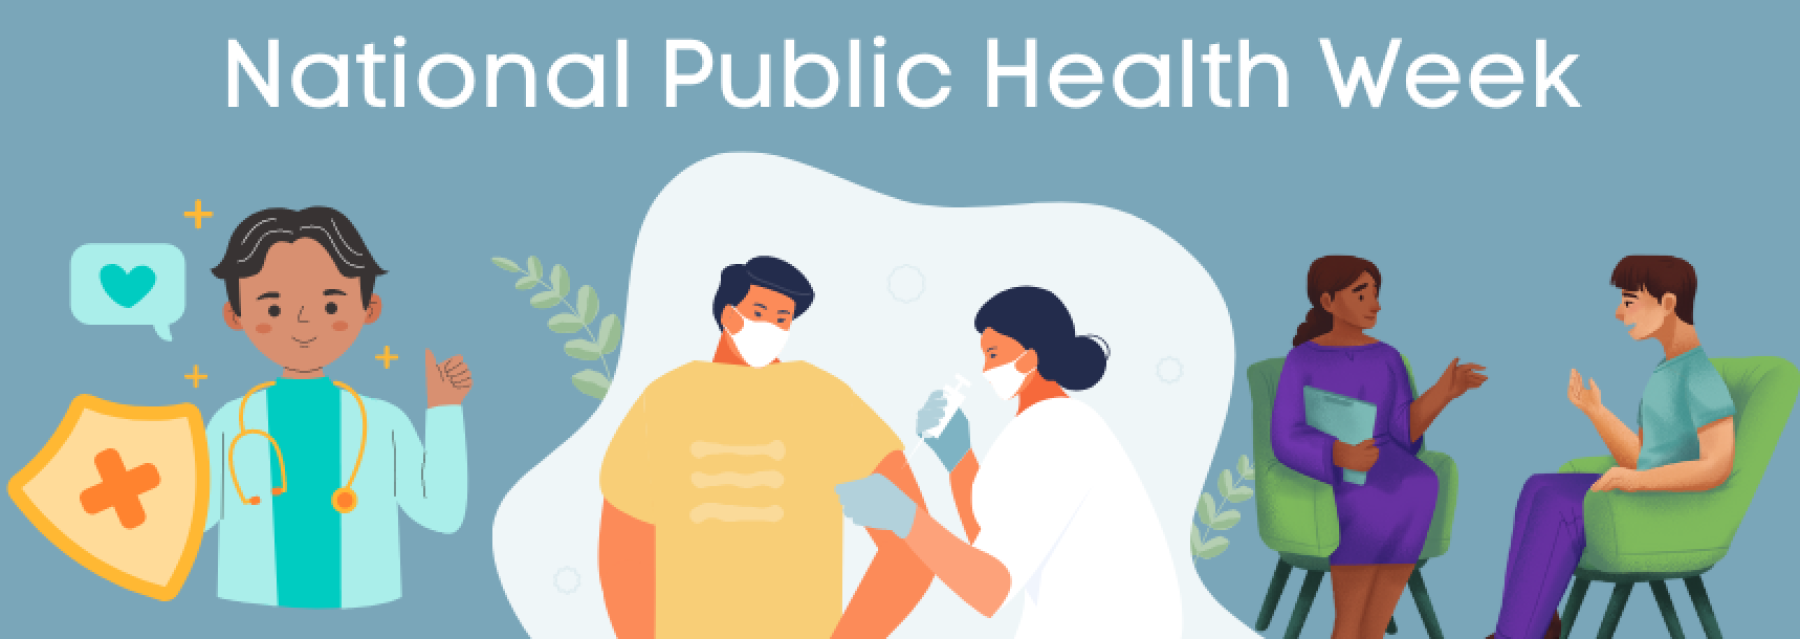 Public health professionals in various settings